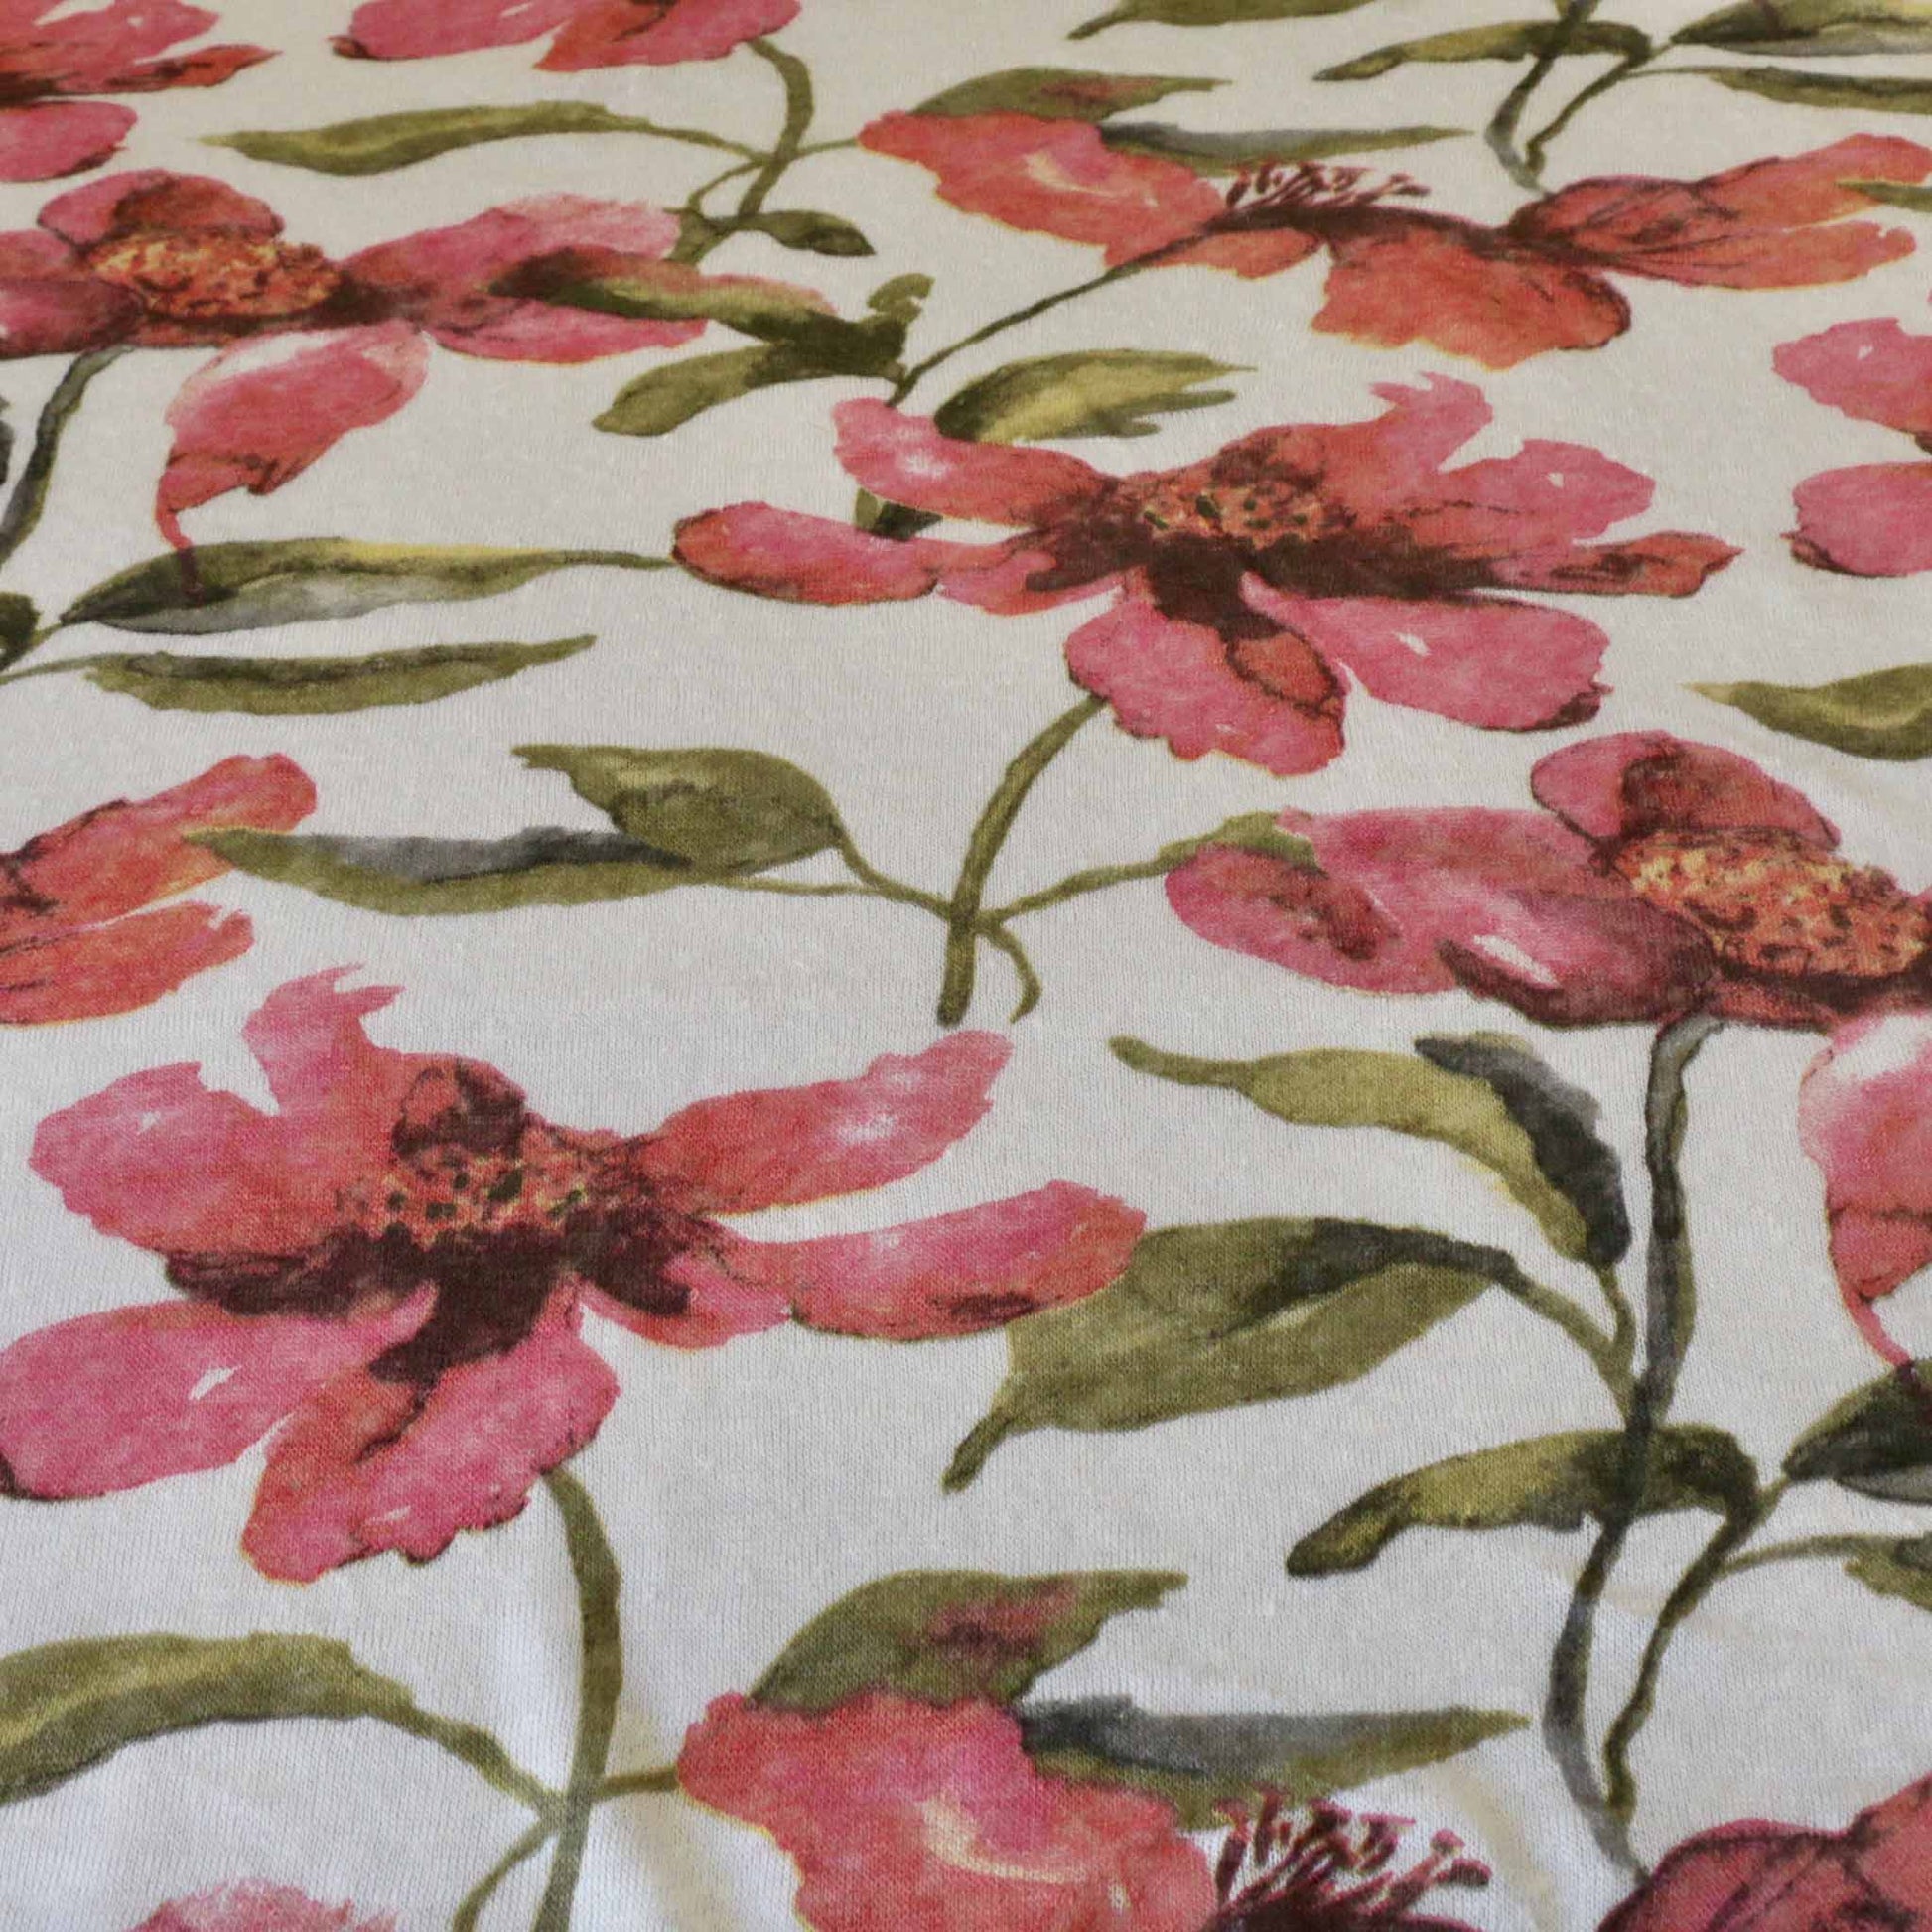 pink and white linen jersey dressmaking fabric with floral print